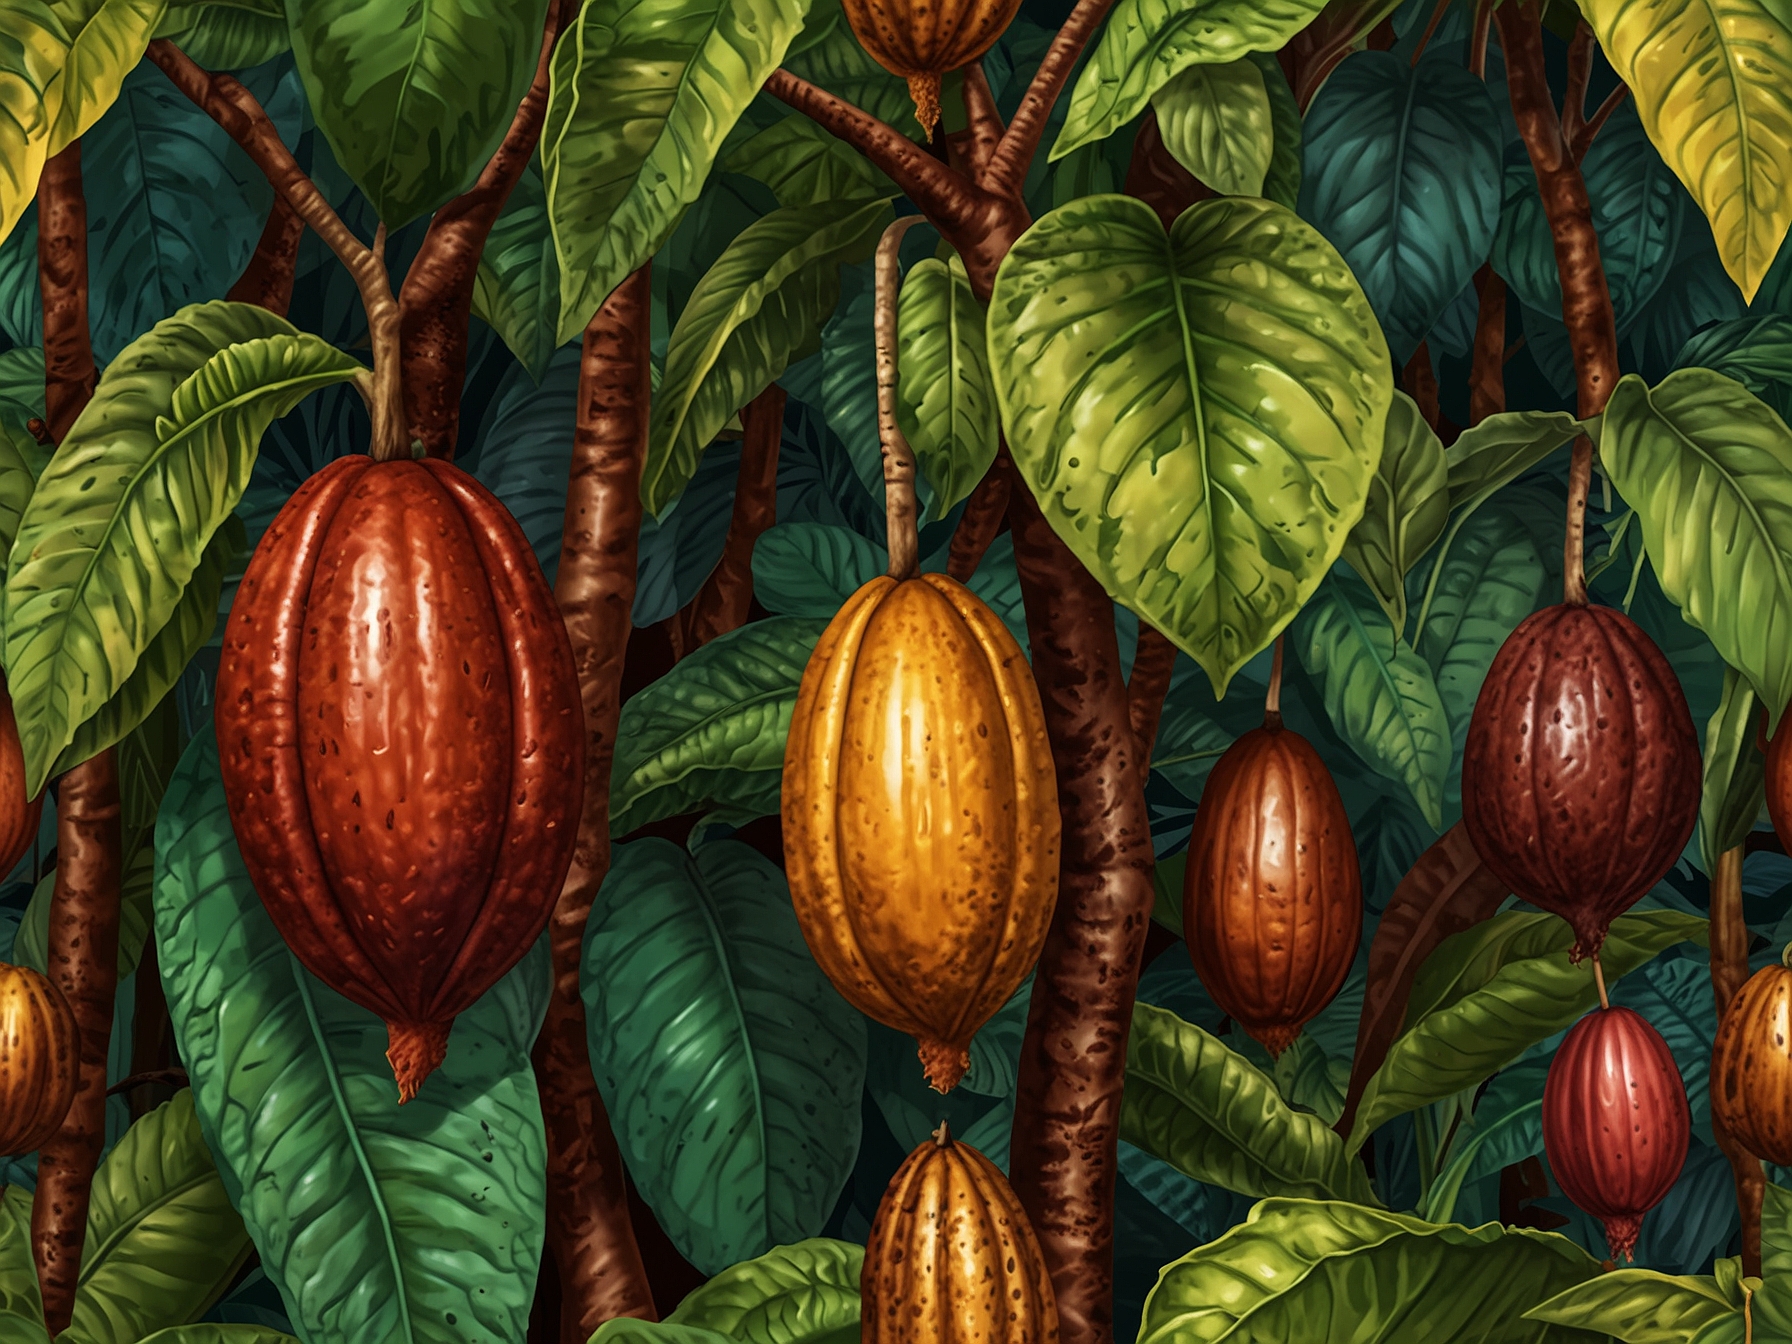 A vibrant cacao plantation with various cacao plants, highlighting different genetic traits. The image illustrates the diversity in cacao varieties, vital for breeding robust and high-quality cacao plants.